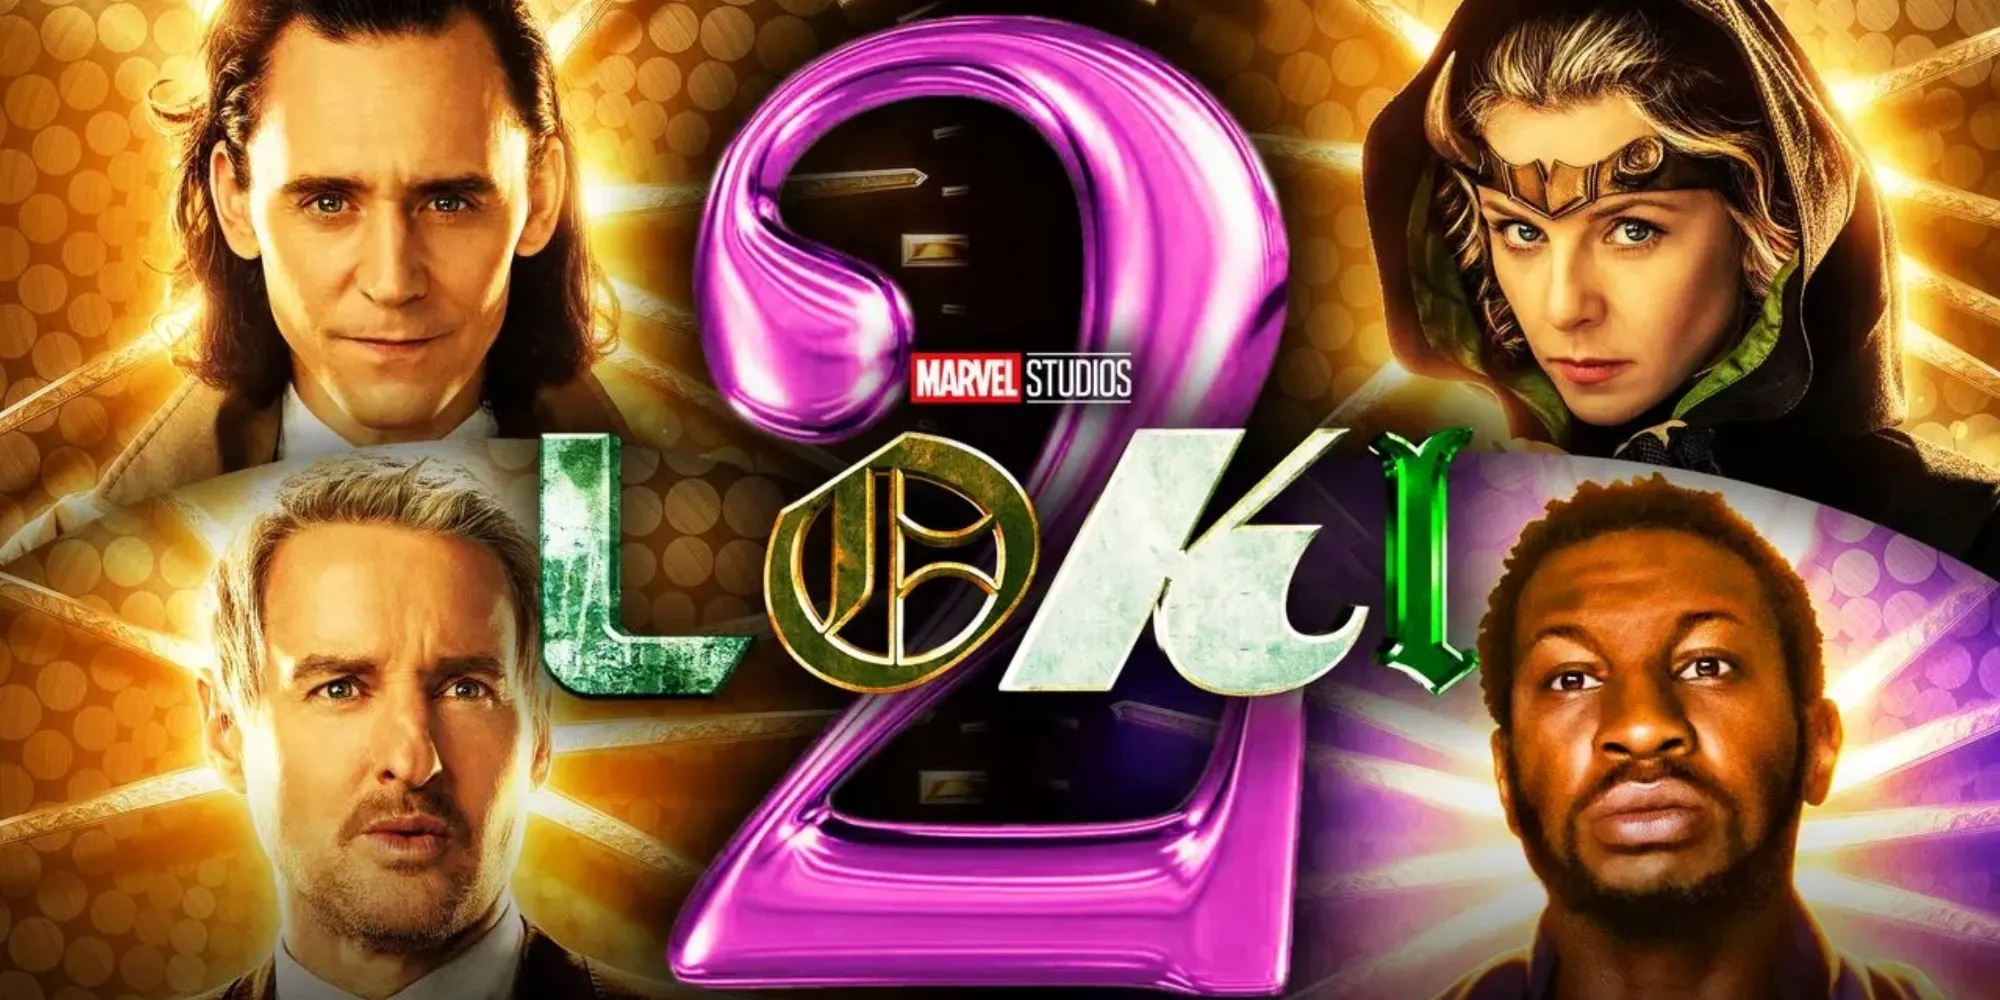 Exciting News: Loki Season 2 Premieres on Disney+ - Schedule, Cast, and Multiverse Mysteries Unveiled!